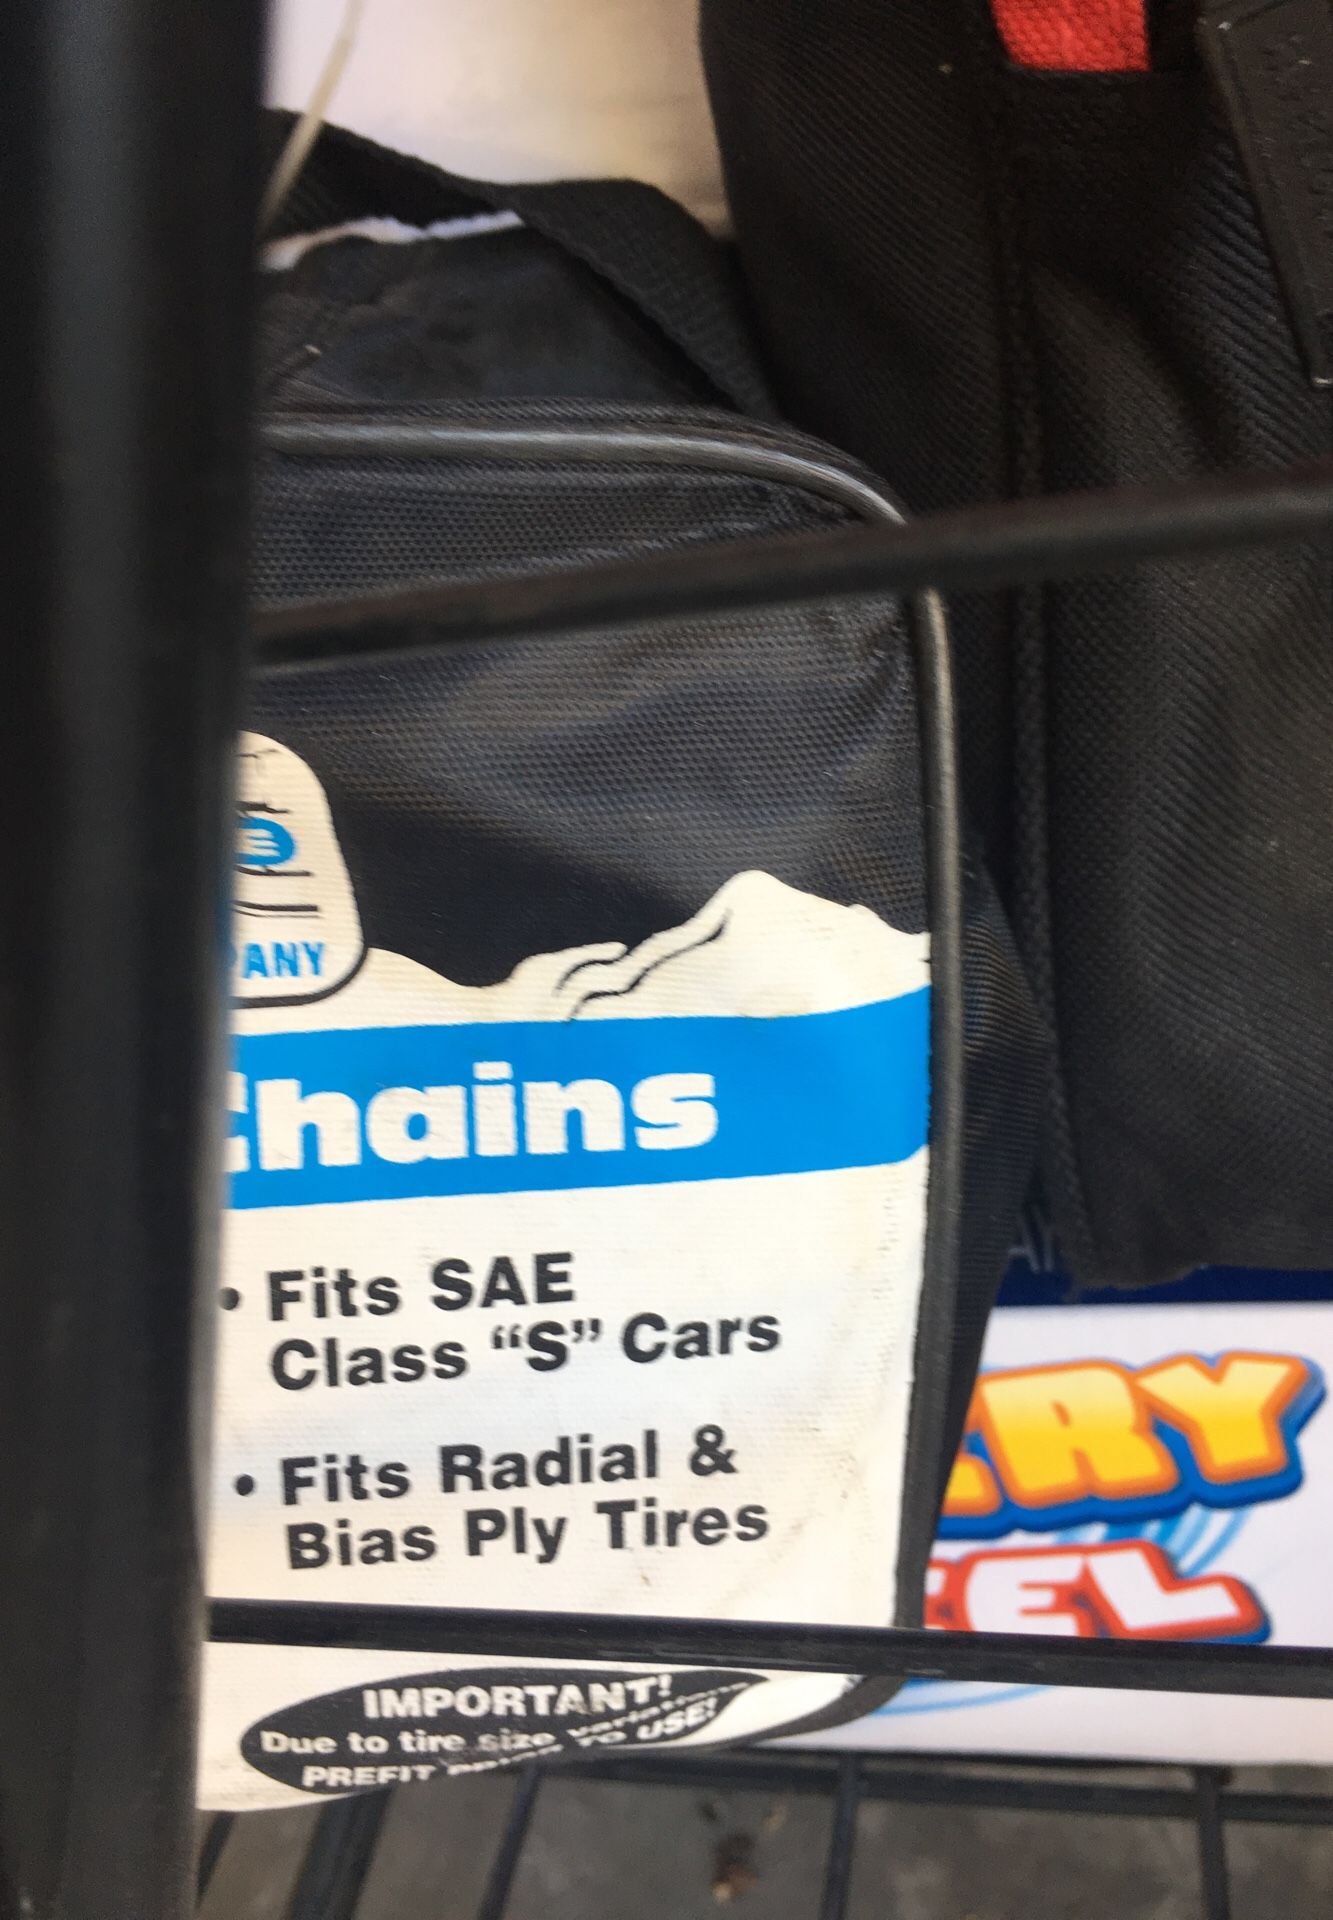 Car chains bran new never opened SaE class c tires